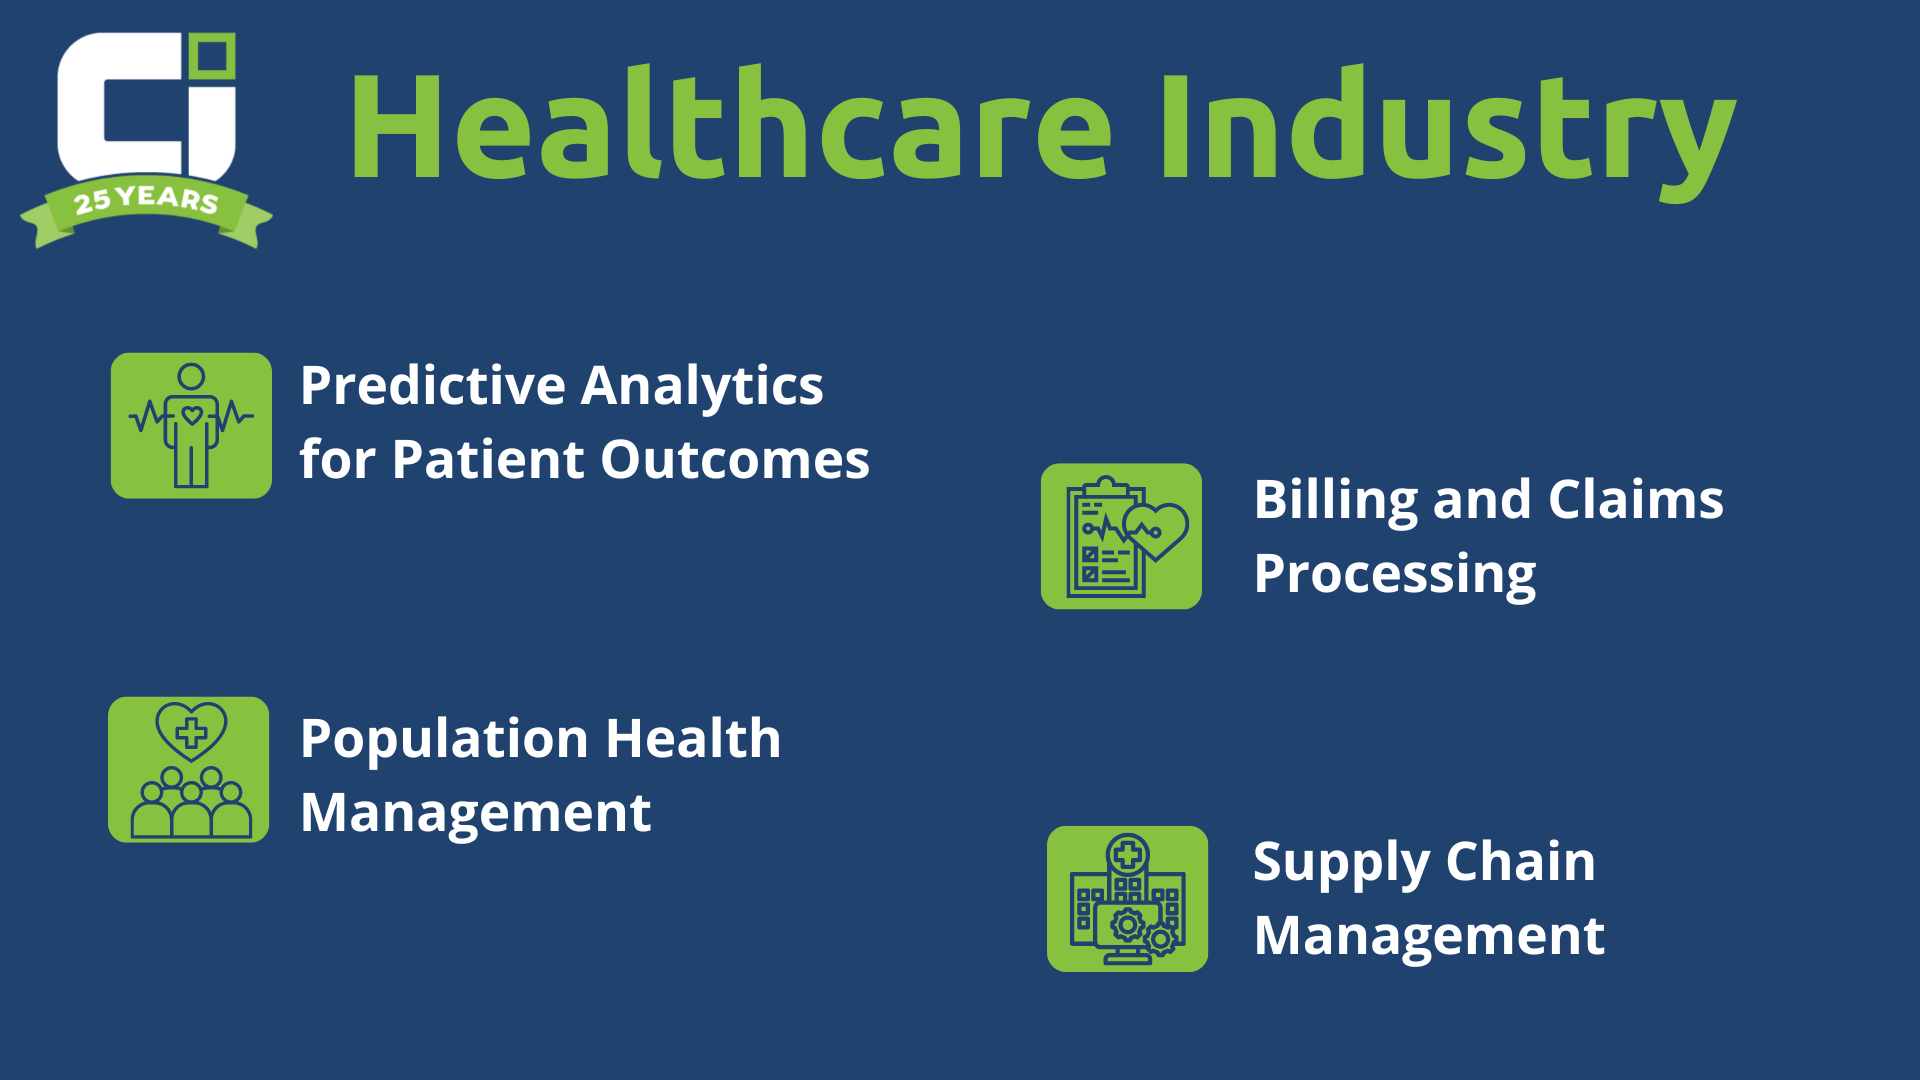 Azure in the Healthcare Industry